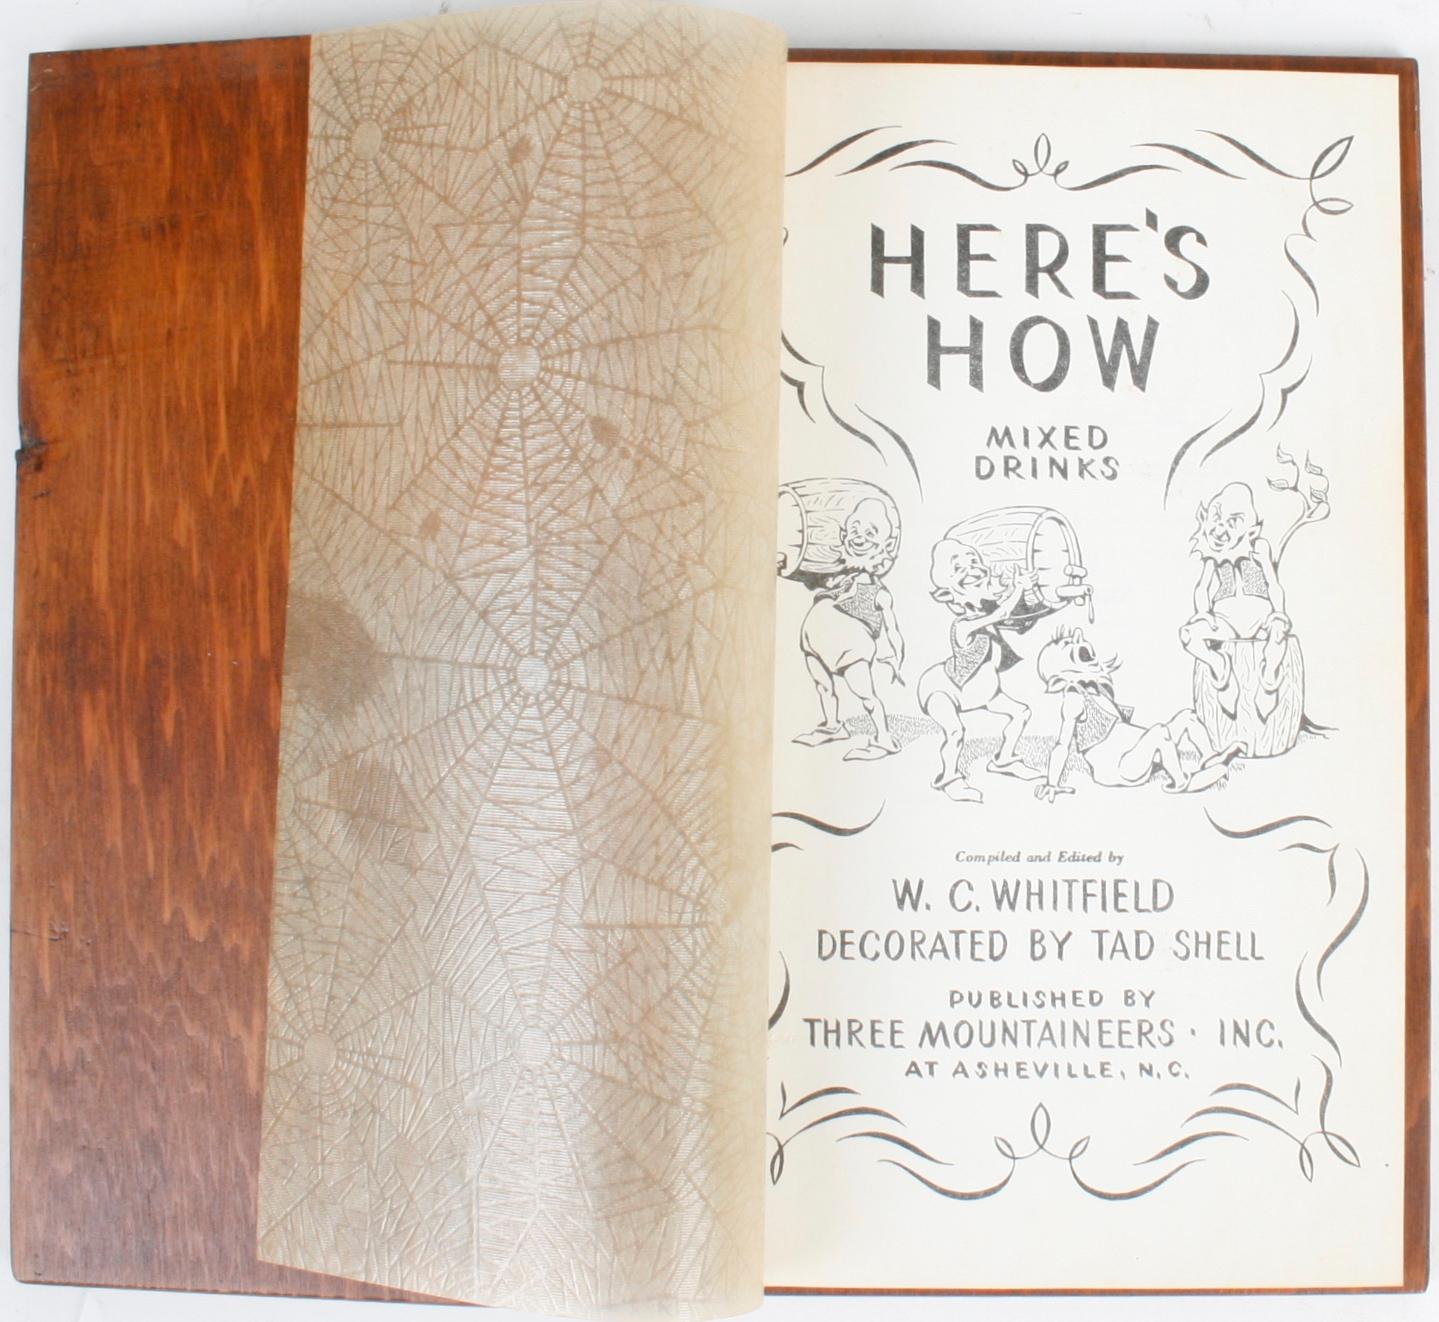 Here's how, mixed drinks. Asheville: three mountaineers Inc, 1941. Wood cover. 77 pp. A fun book, bartender's guide with illustrations by Tad Shell and a handcrafted wooden board cover with embossed and painted color illustration. Bound with a